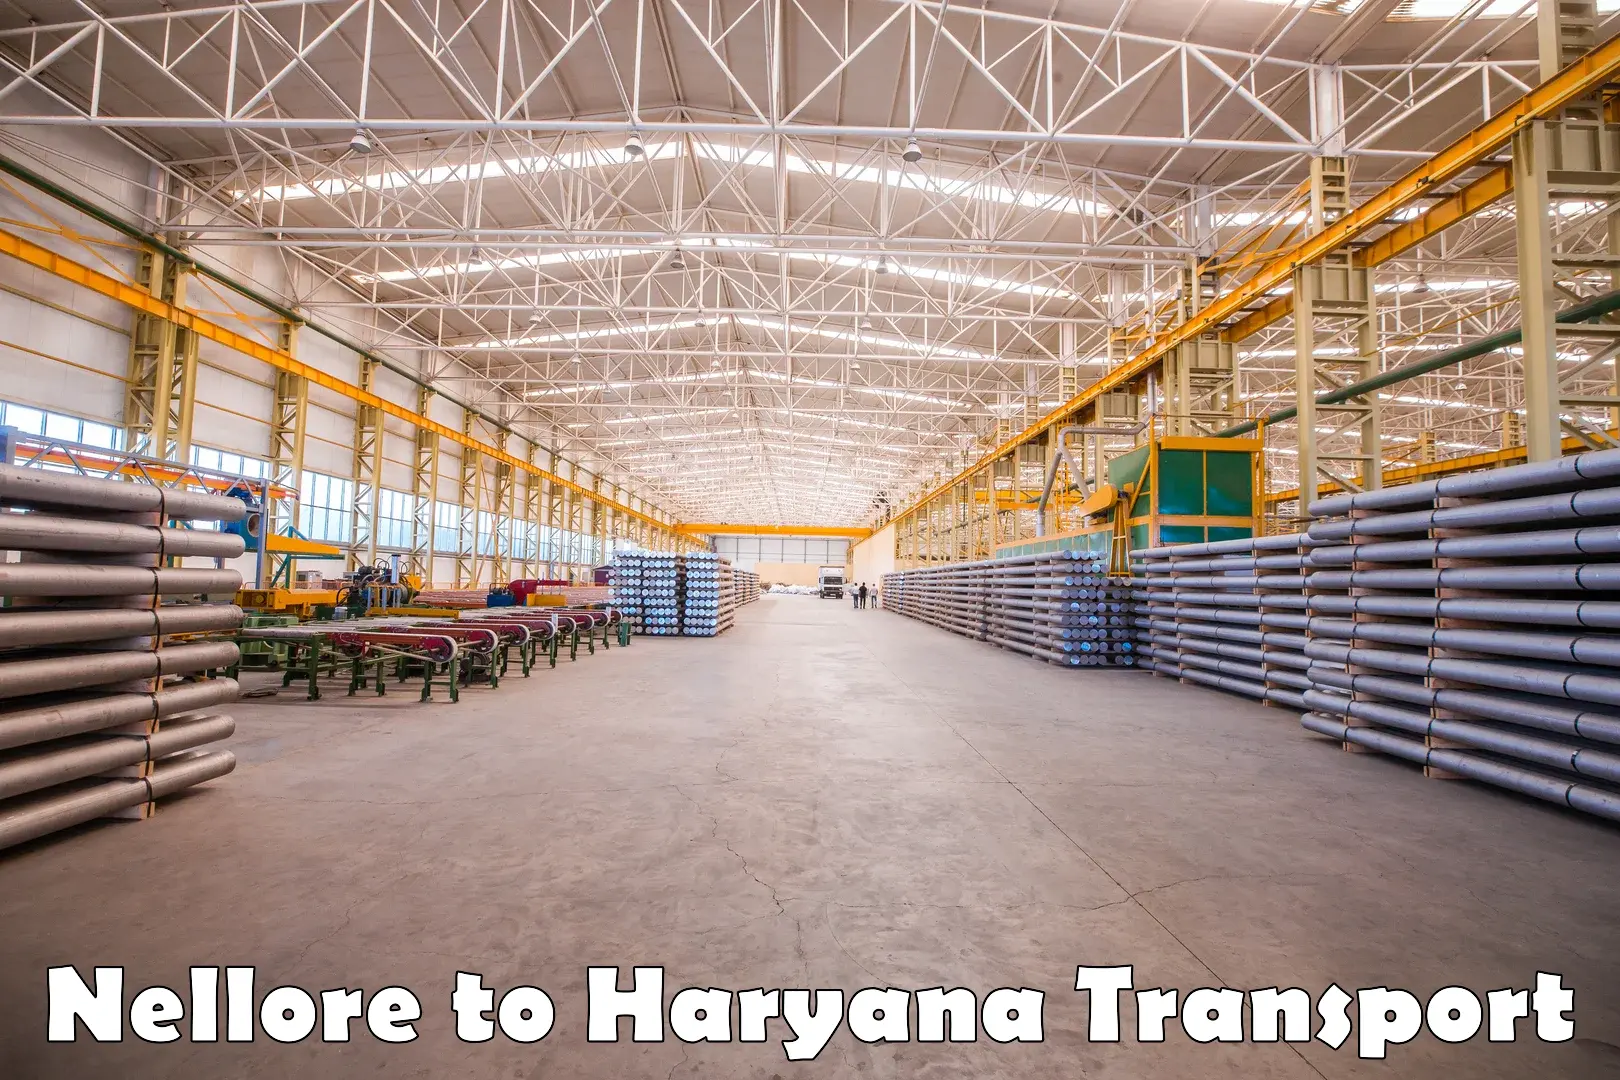 Shipping partner Nellore to NCR Haryana